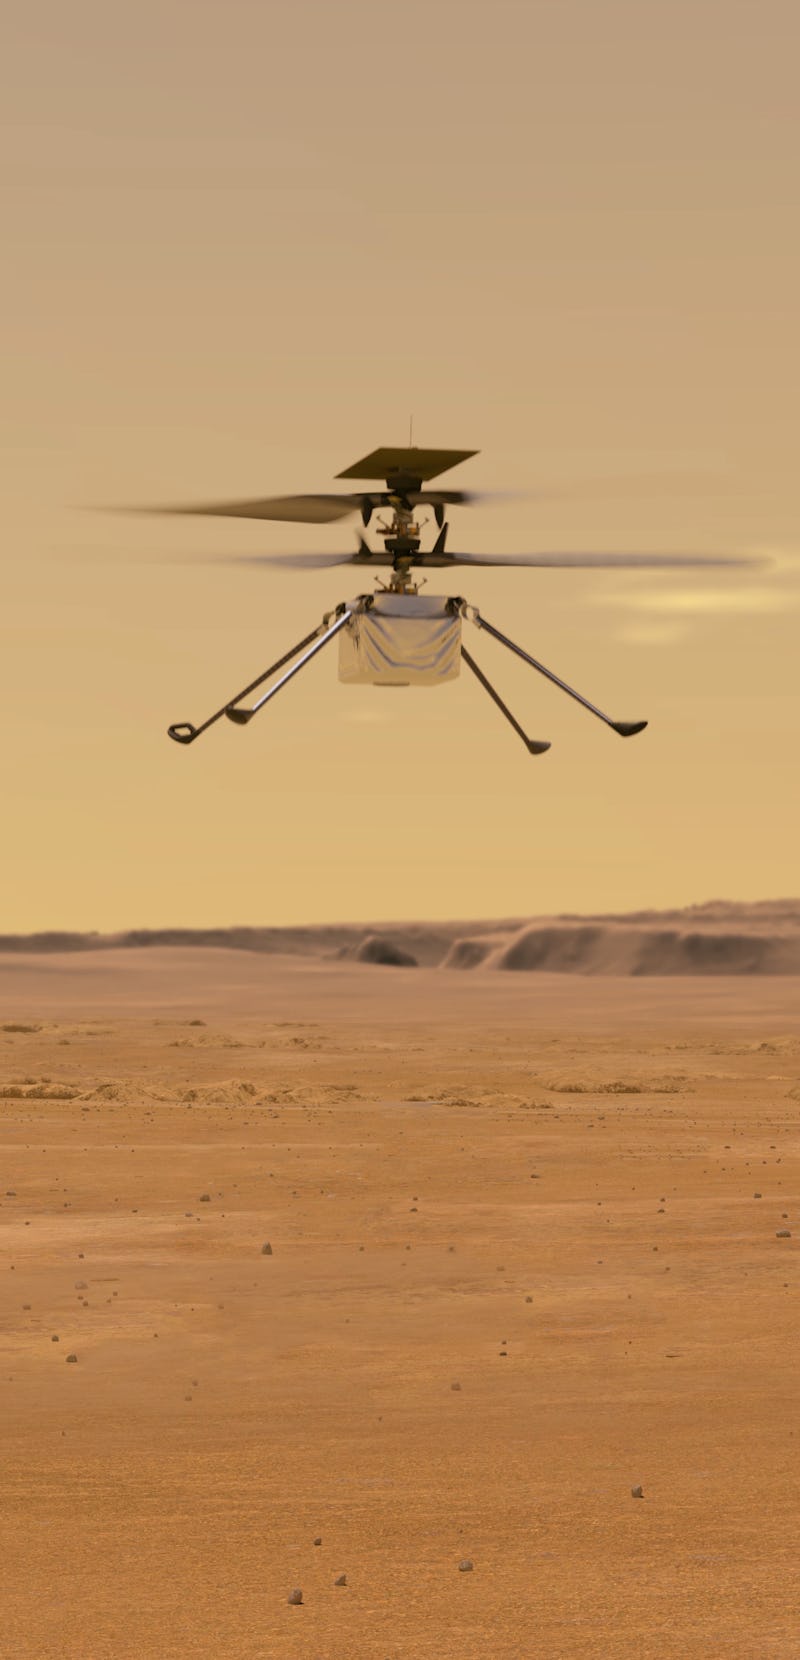 Ingenuity flying above Perseverance rover on Mars